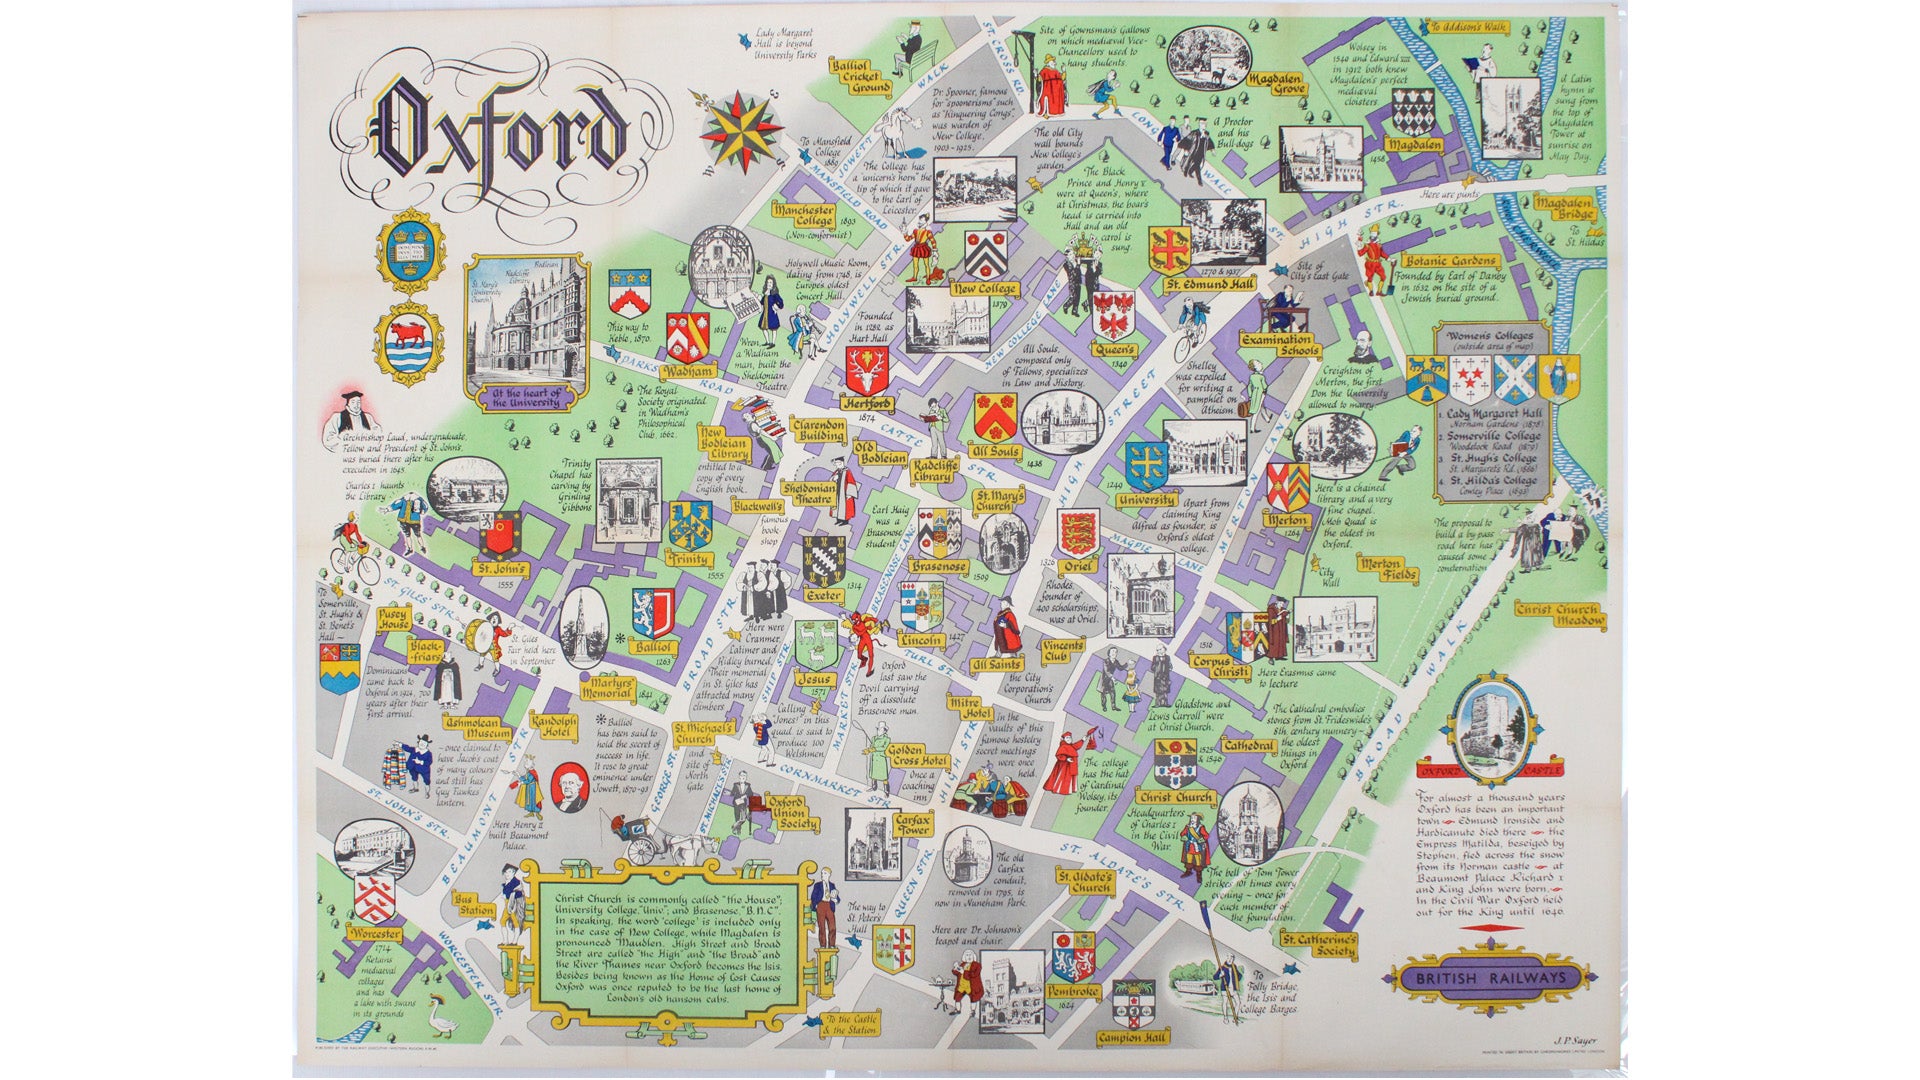 Sayer's Pictorial Map of Oxford